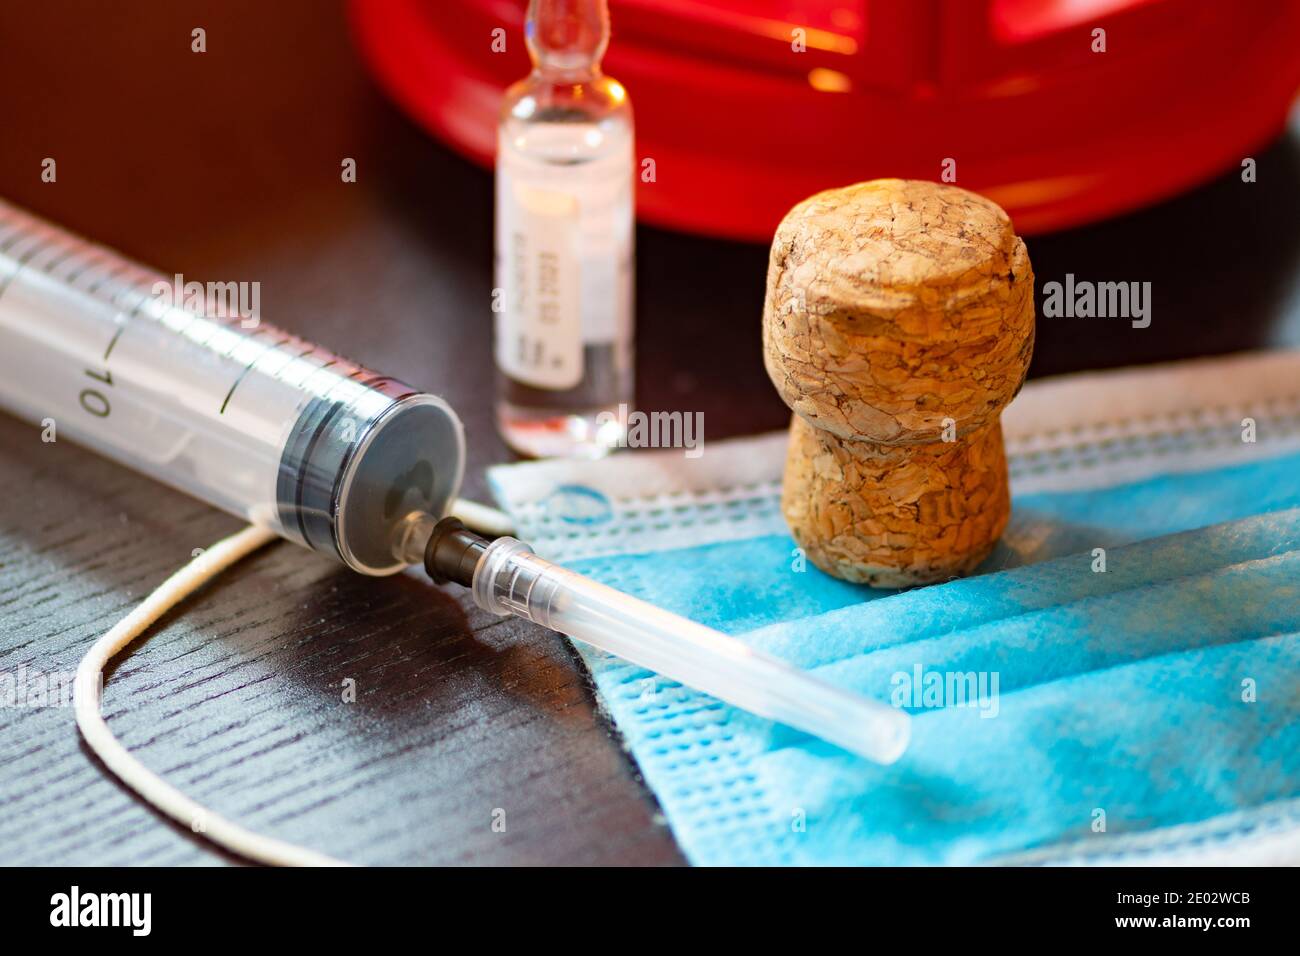 Syringe, vial, surgical face mask and cork. New year concept during Covid19 or Coronavirus emergency, no party Stock Photo